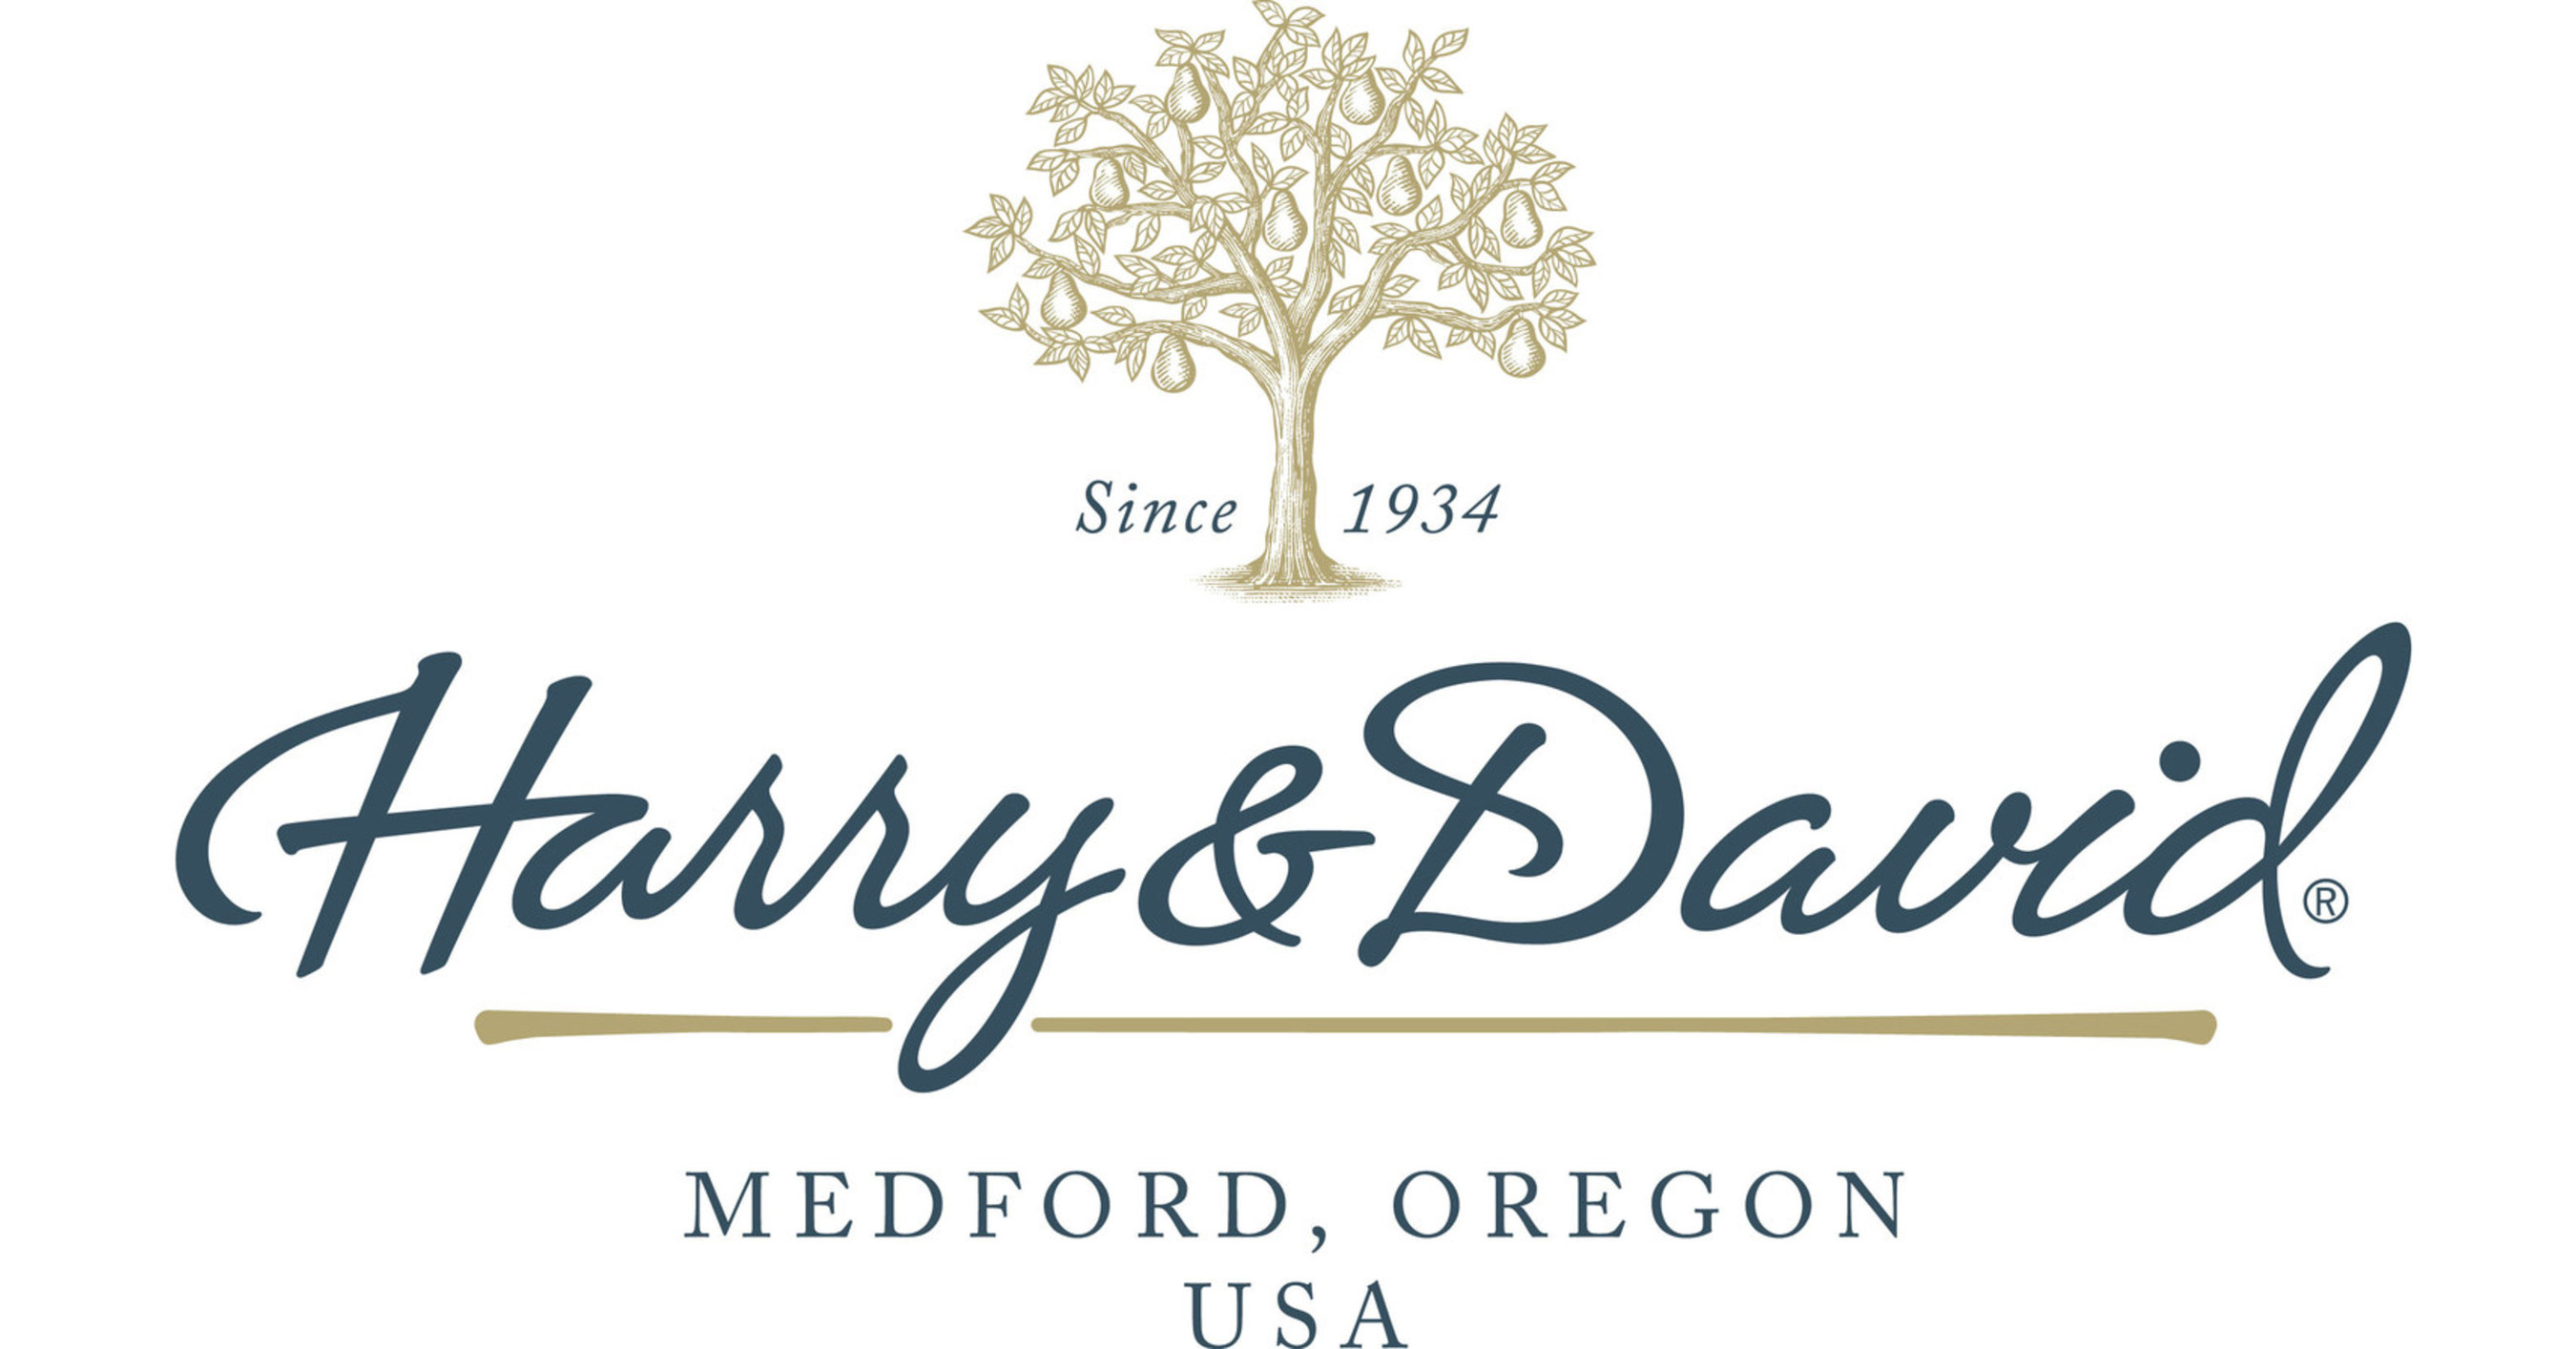 Harry & David To Open Nearly 20 Holiday PopUp Stores